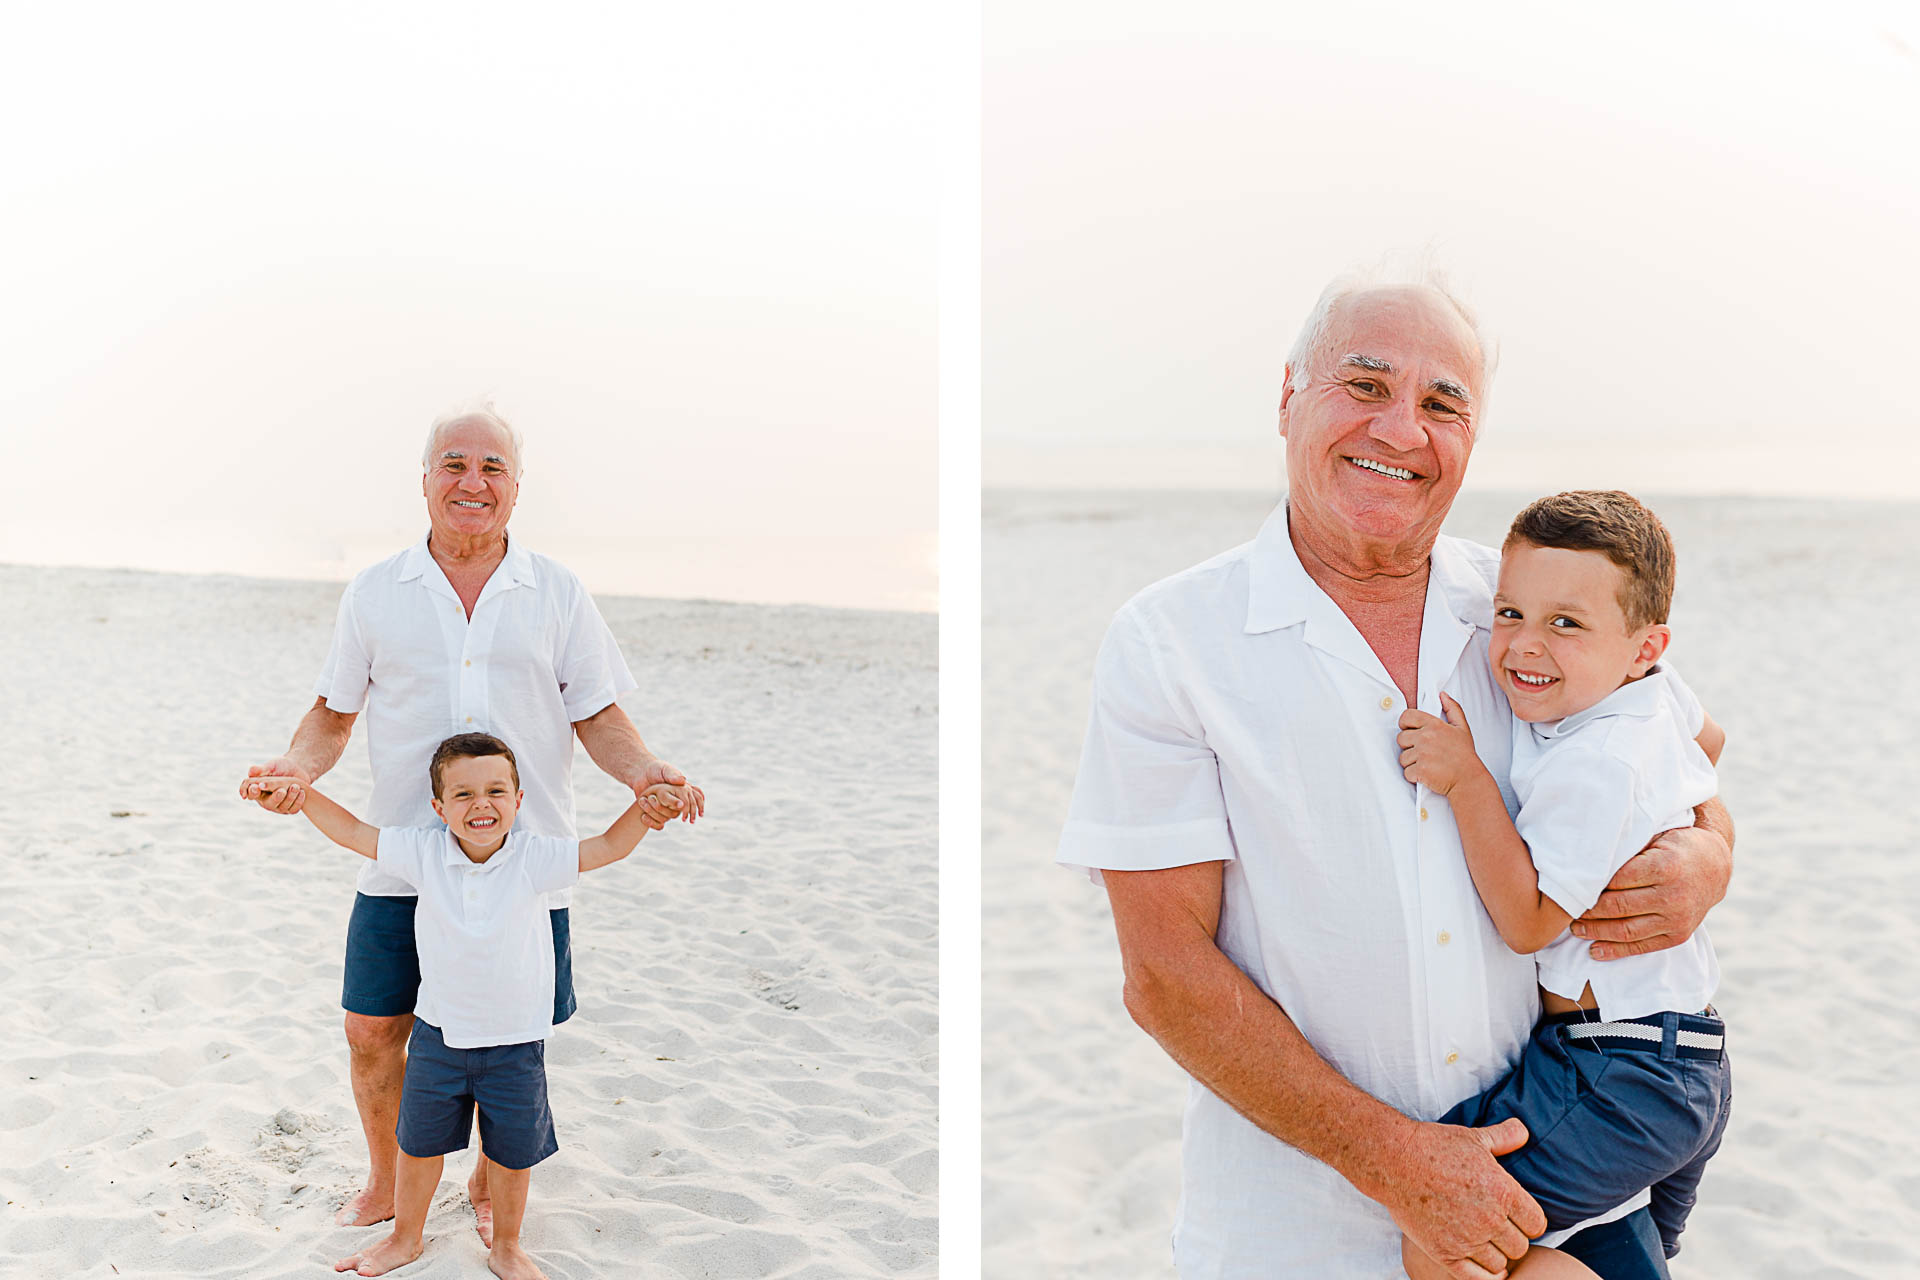 Photo by Cape Cod Family Photographer Christina Runnals | Little boy with his grandfather on Cape Cod beach